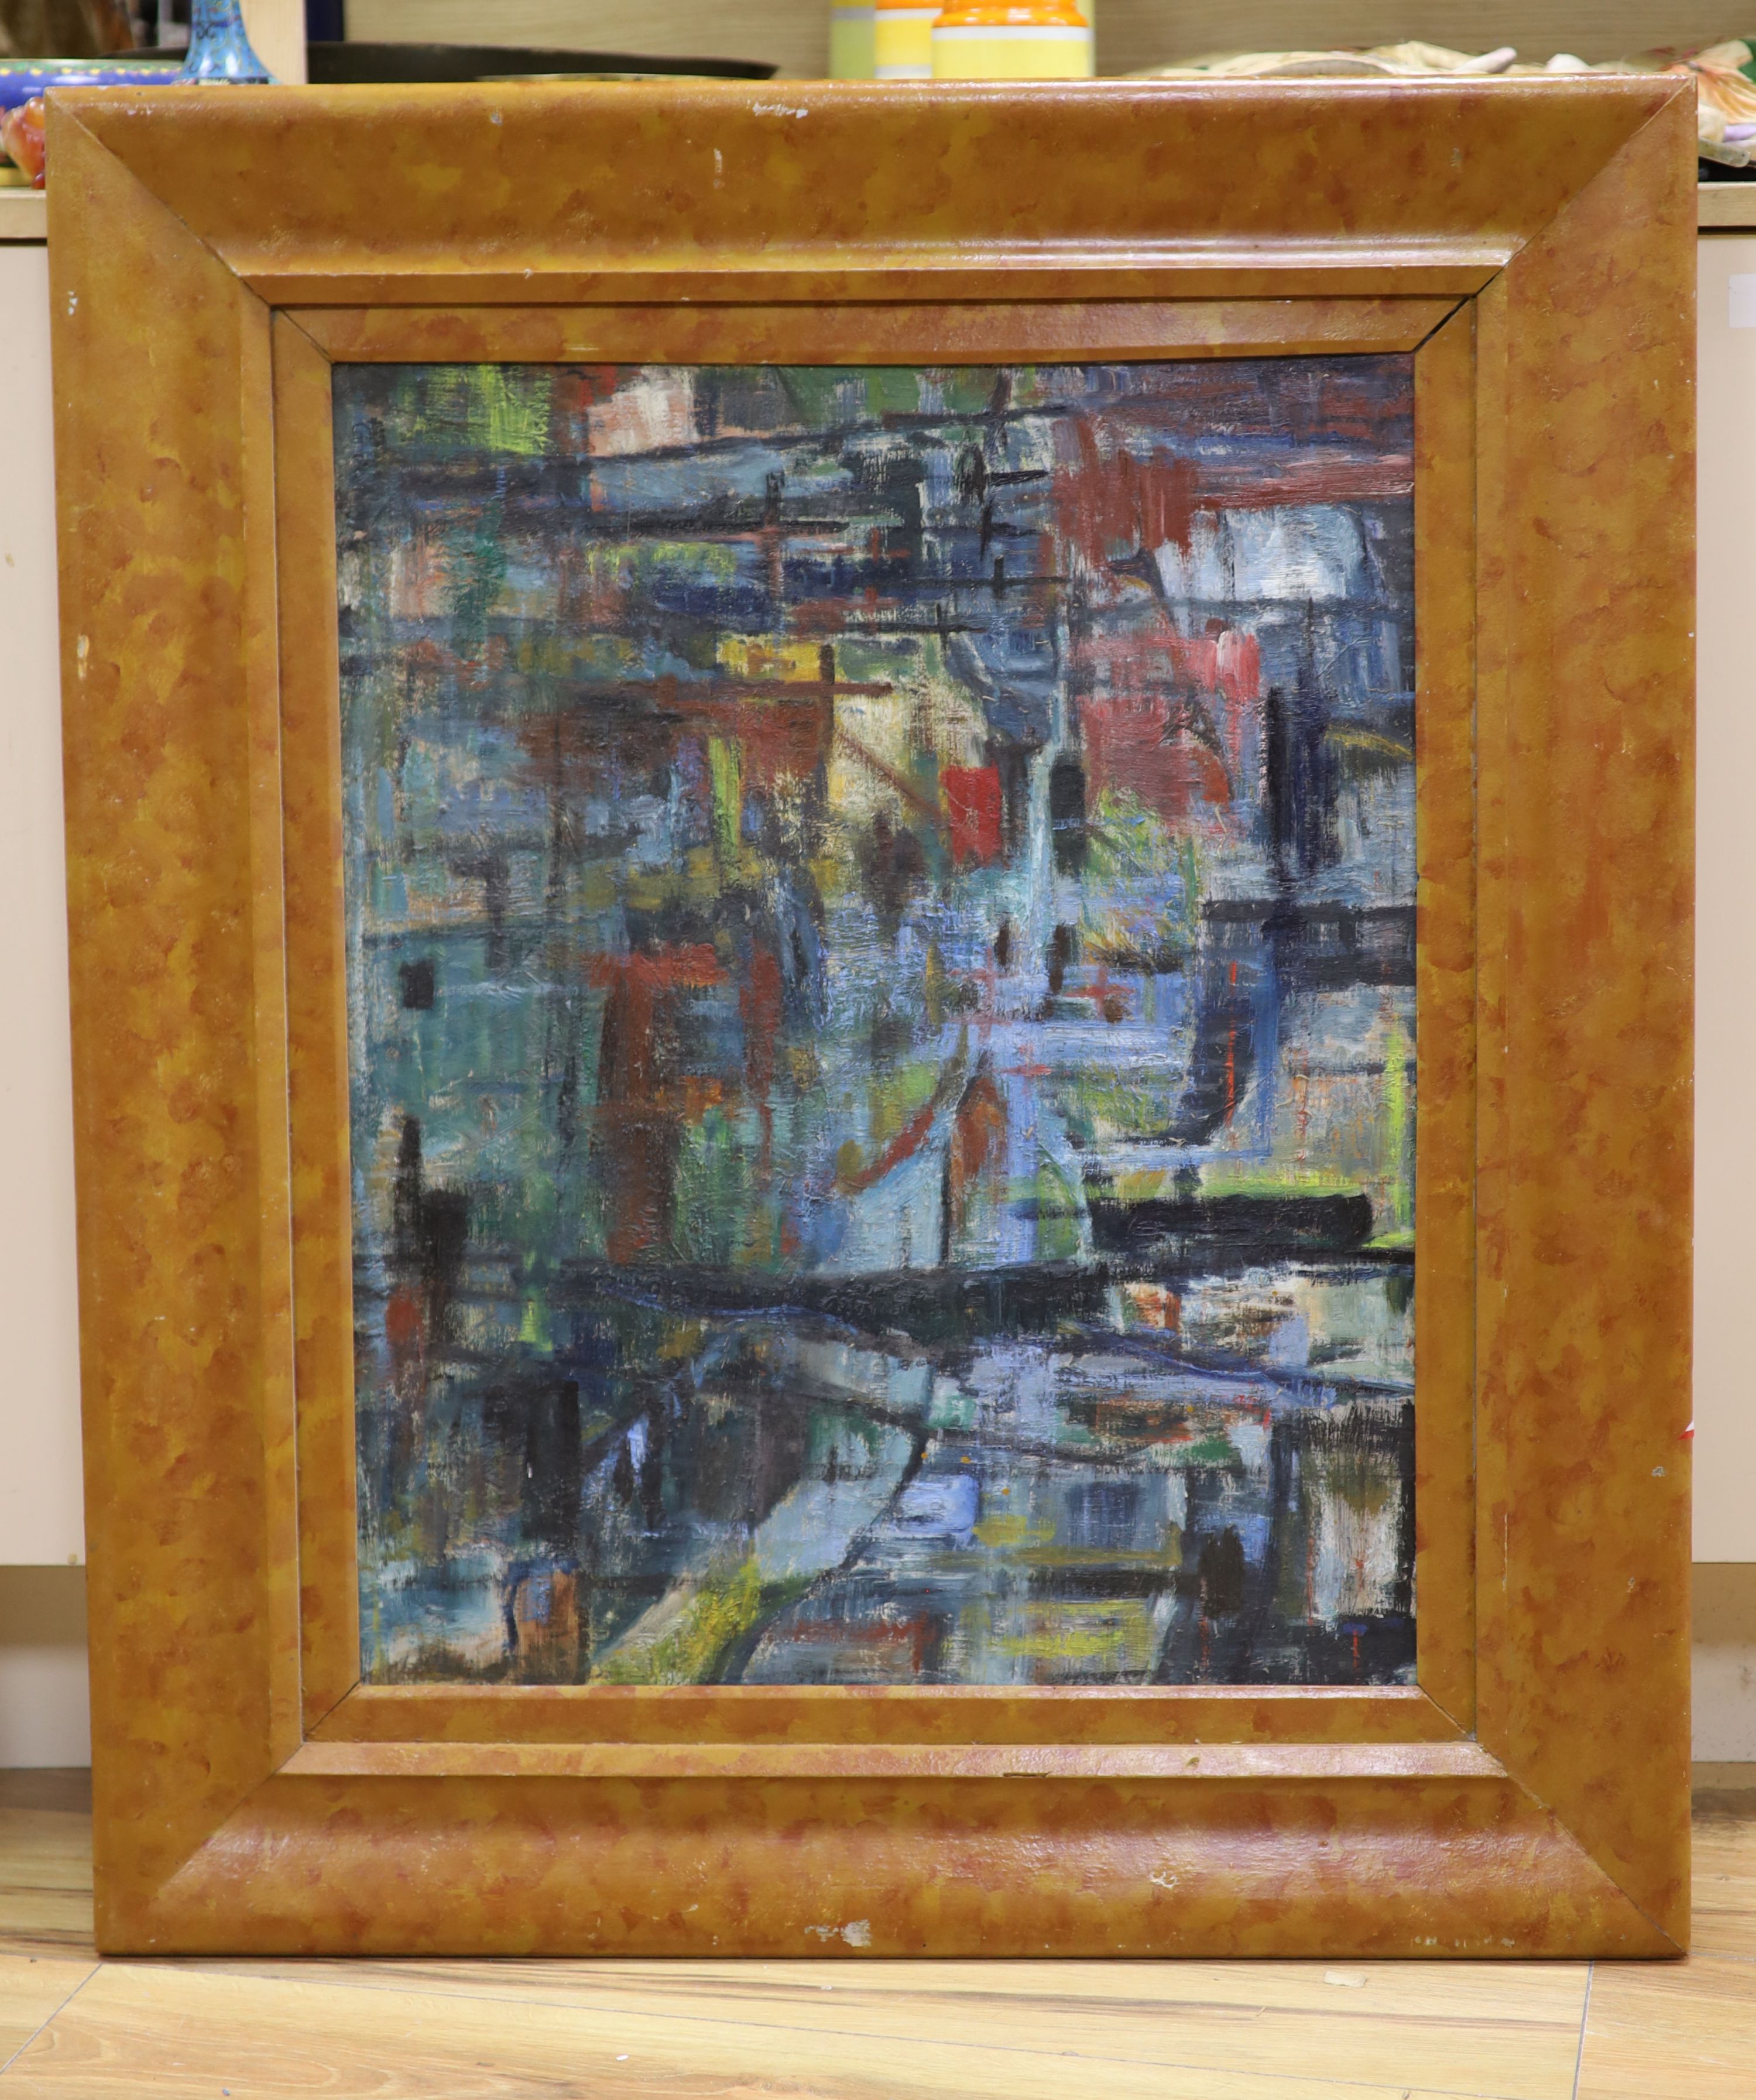 An early 20th century continental abstract composition, polychrome with crucifix motifs, indistinctly signed lower left, oil on canvas, 50 x 63 cm.